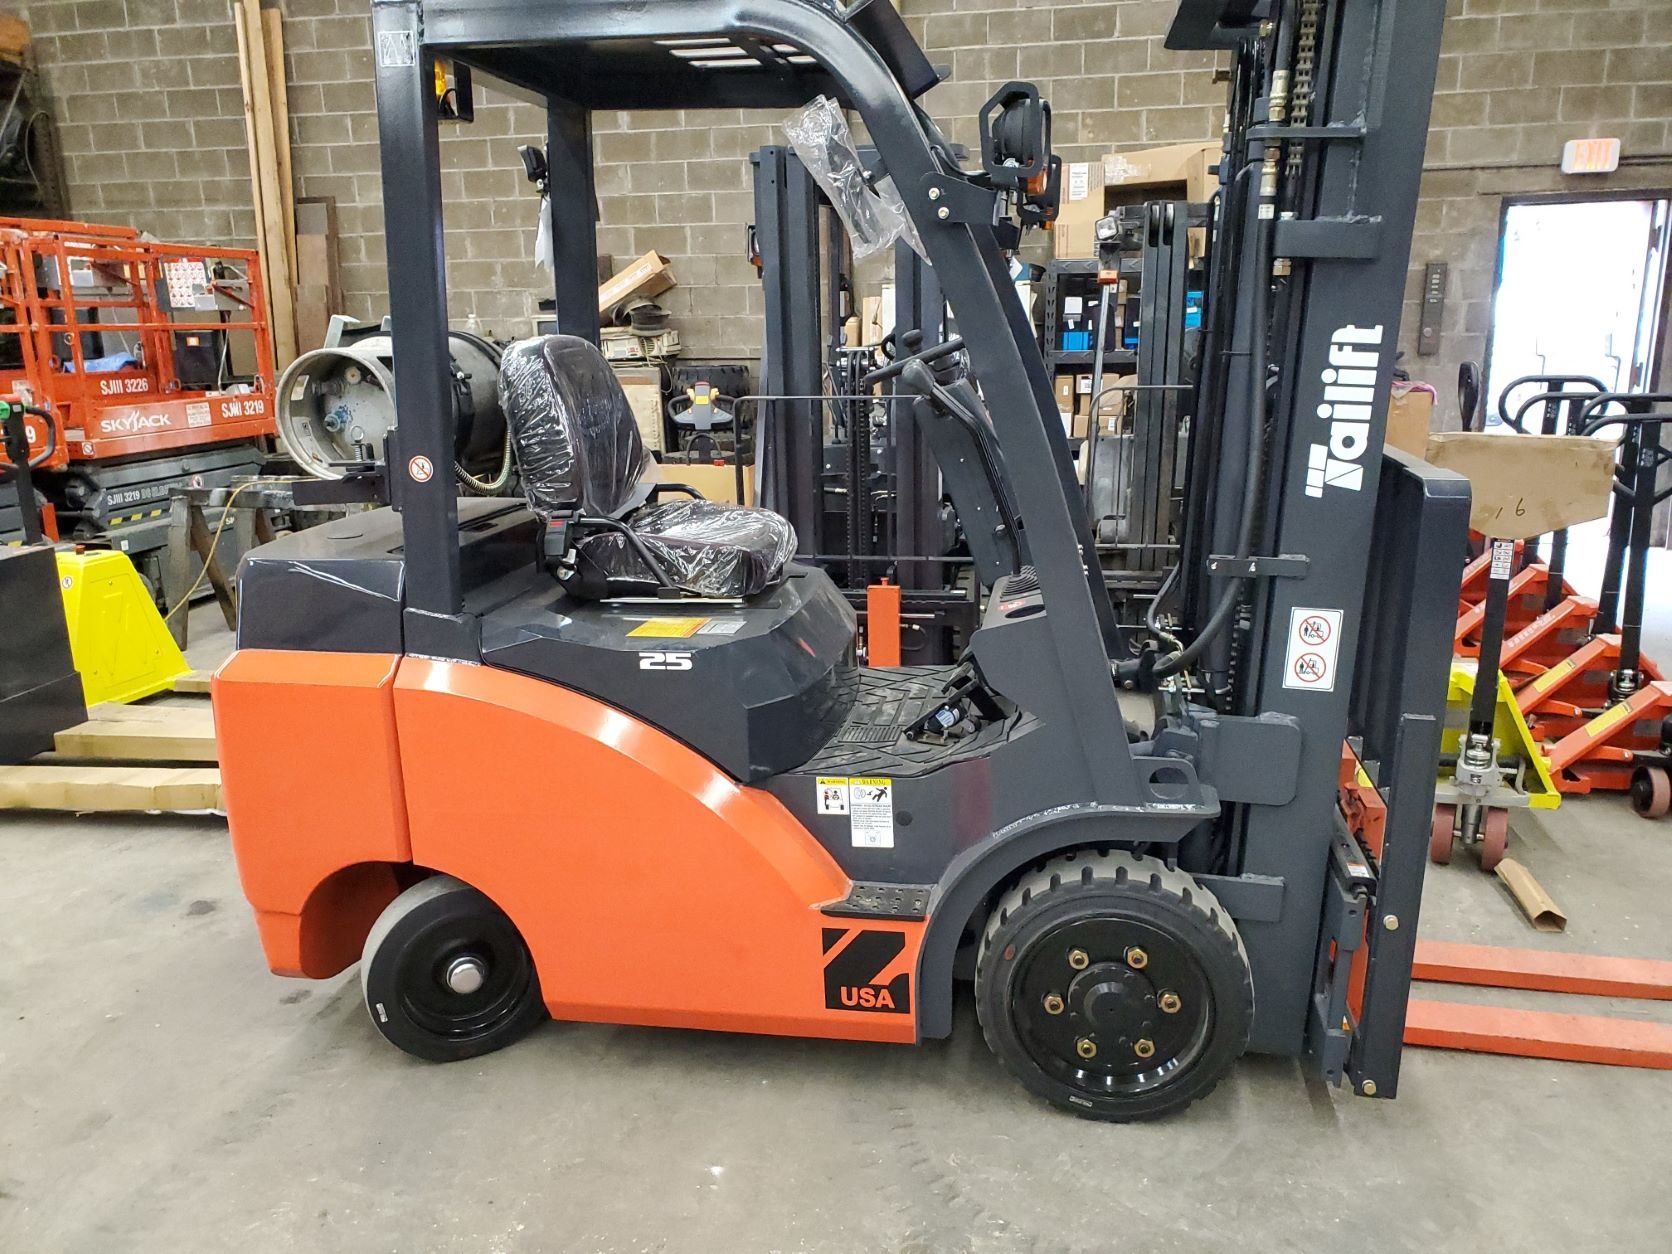 Forklifts — TAI LIFT ZFG25C 5,000 LB  Capacity Forklift In Manorville, NY